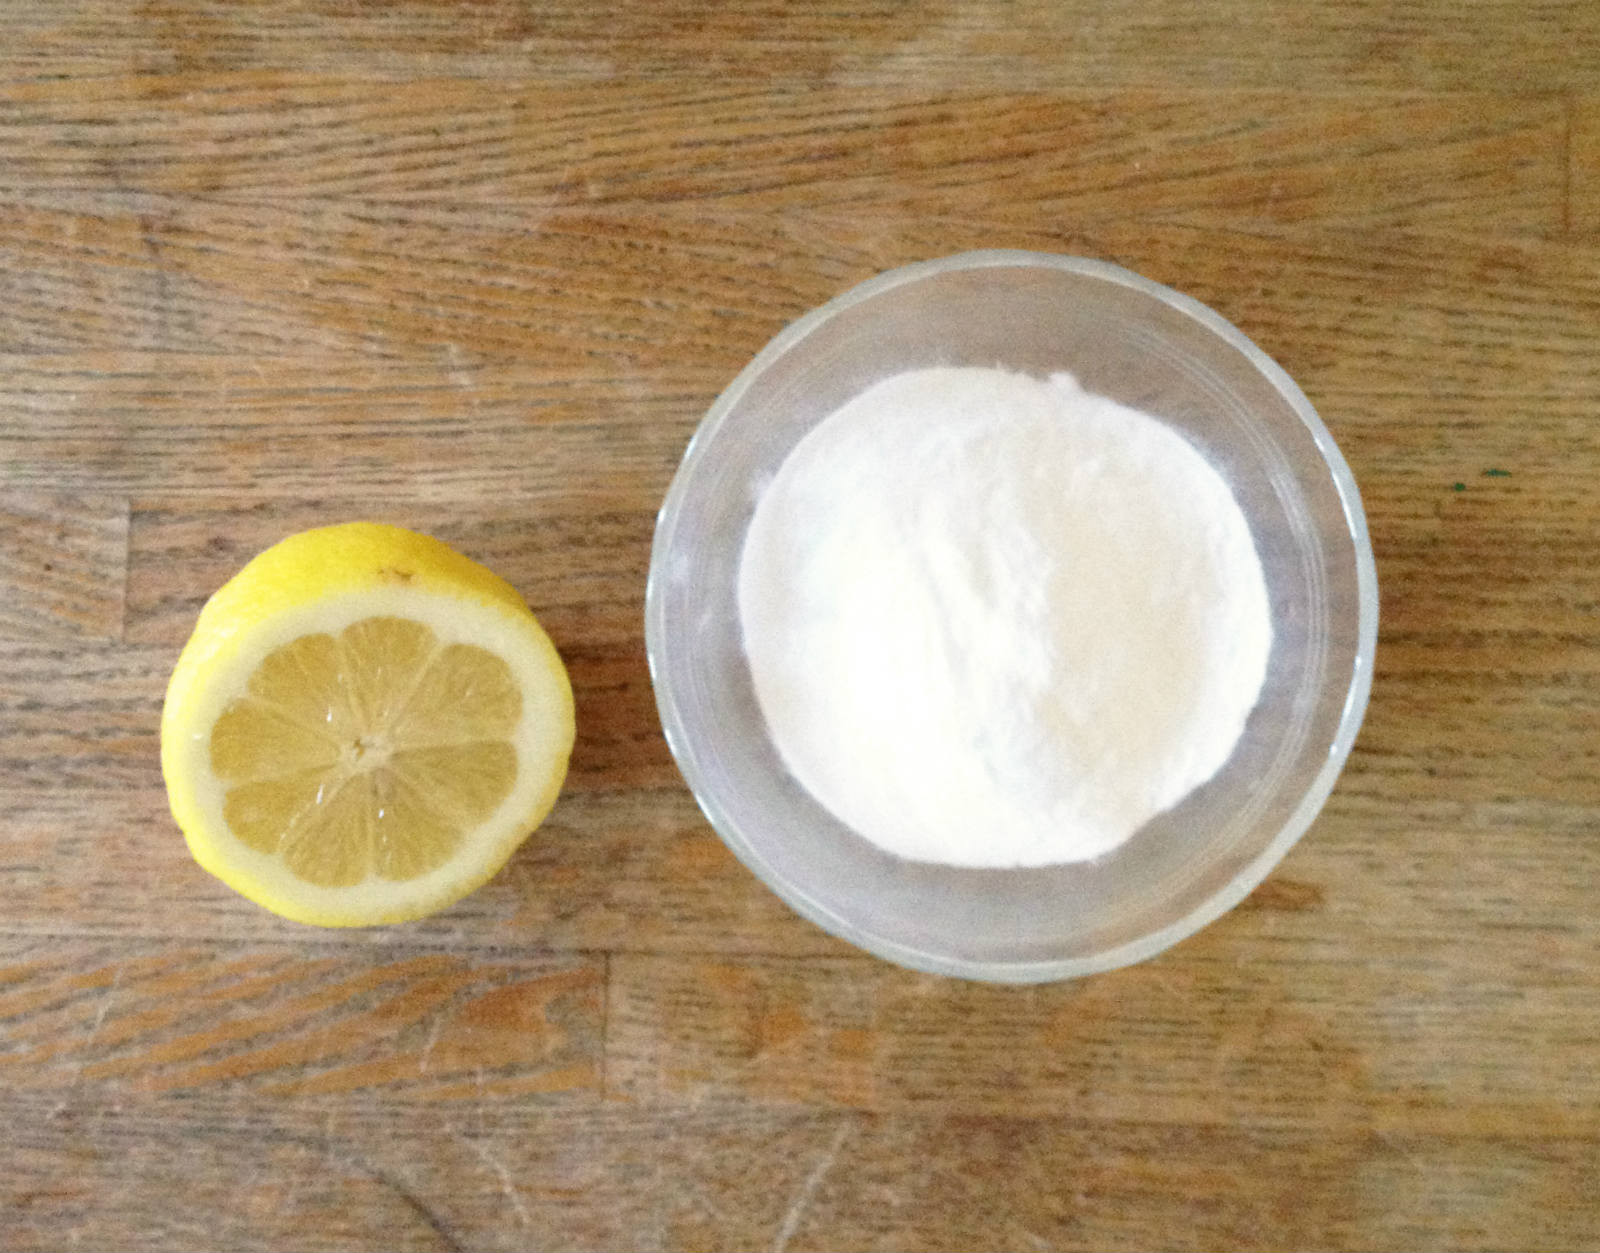 The Best Ideas for Lemon Juice and Baking soda